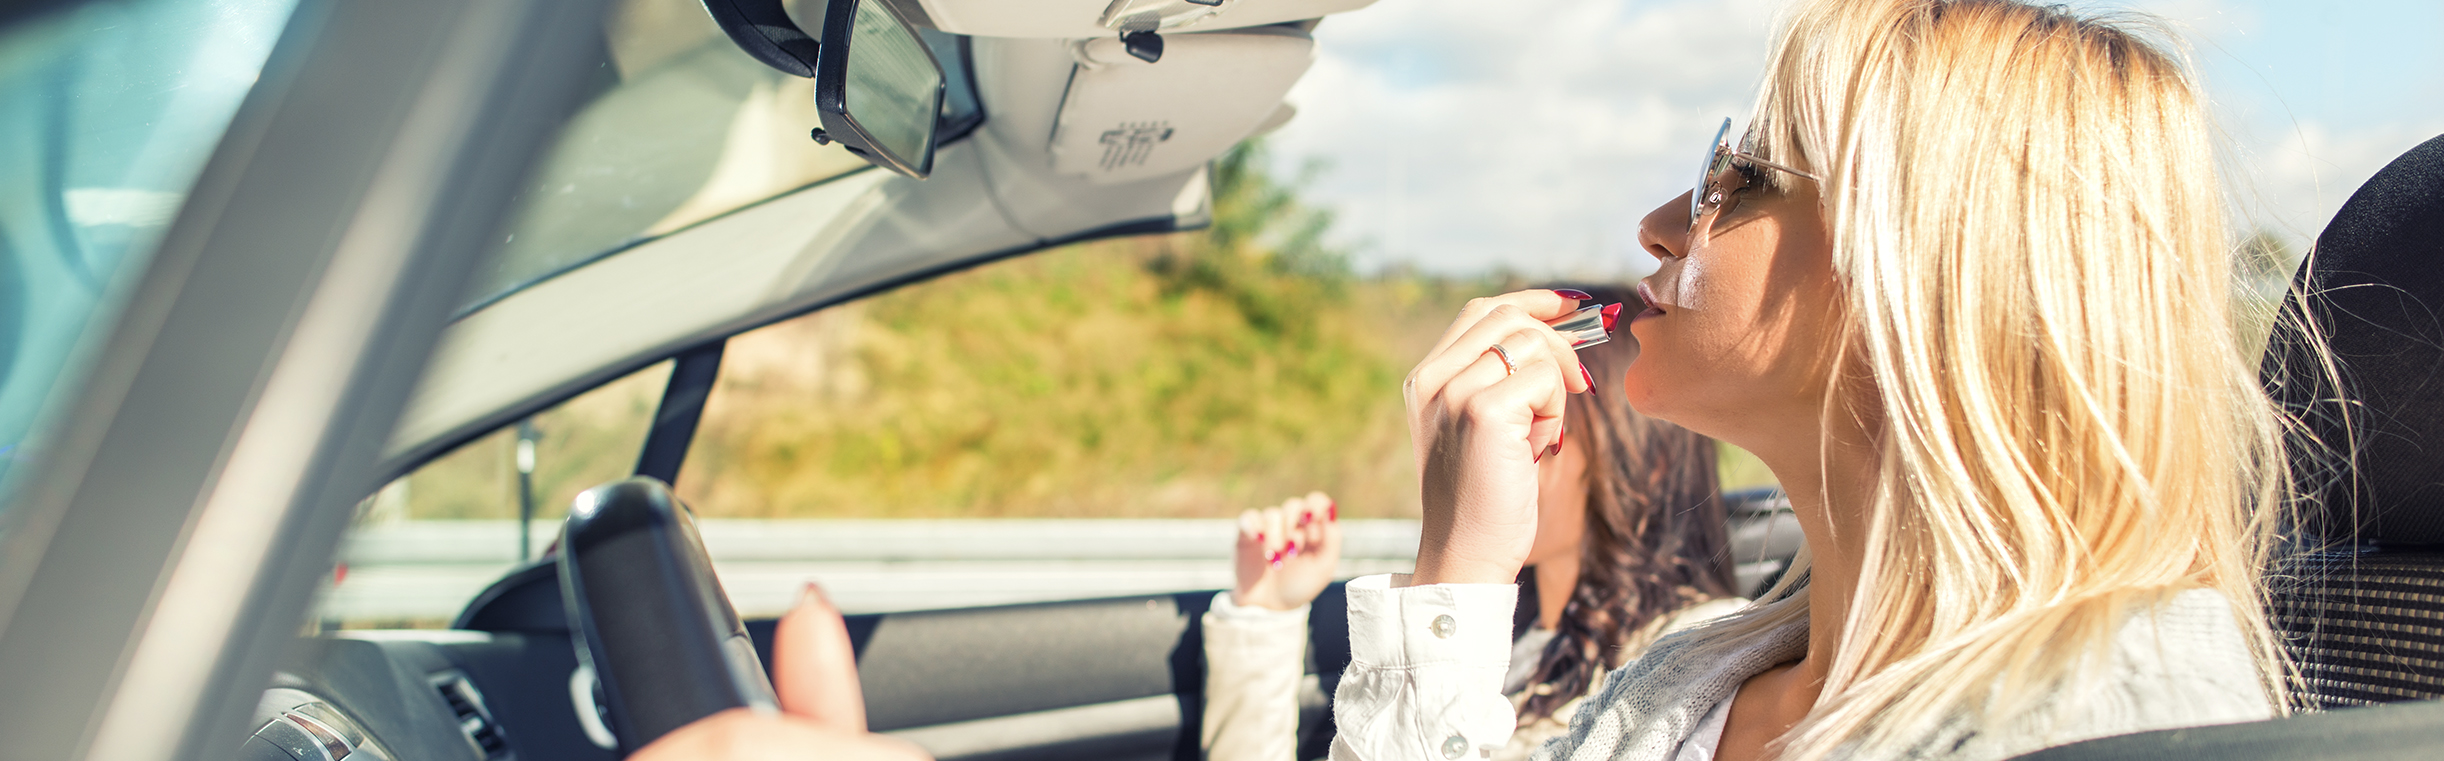 Motorist gets distracted while driving by applying lipstick.